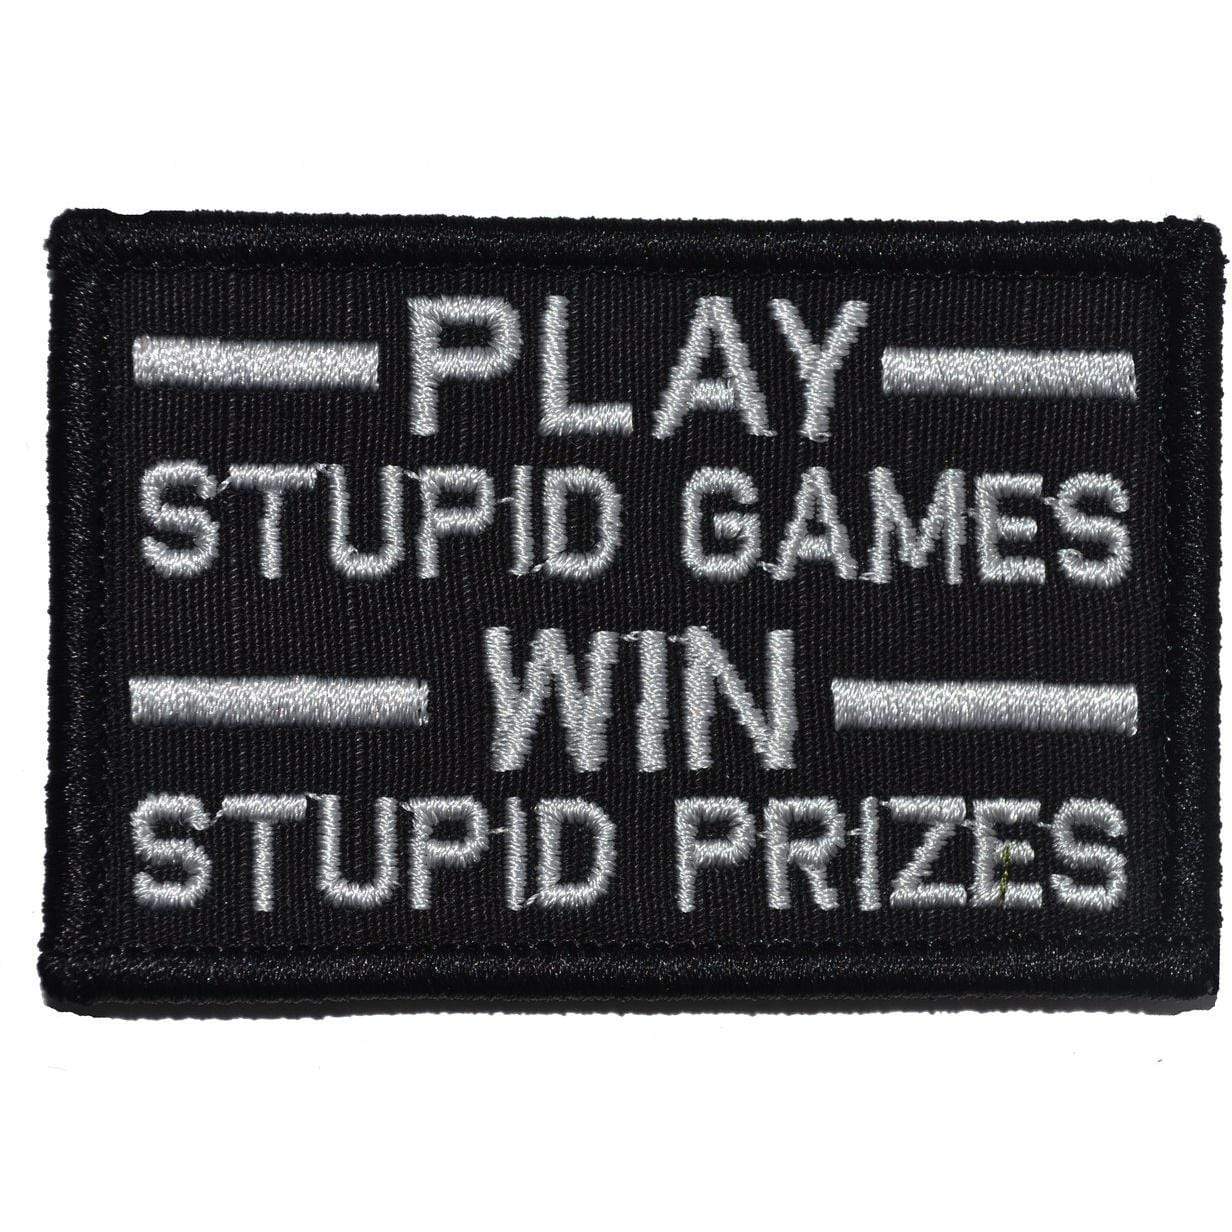 Tactical Gear Junkie Patches Black Play Stupid Games, Win Stupid Prizes - 2x3 Patch